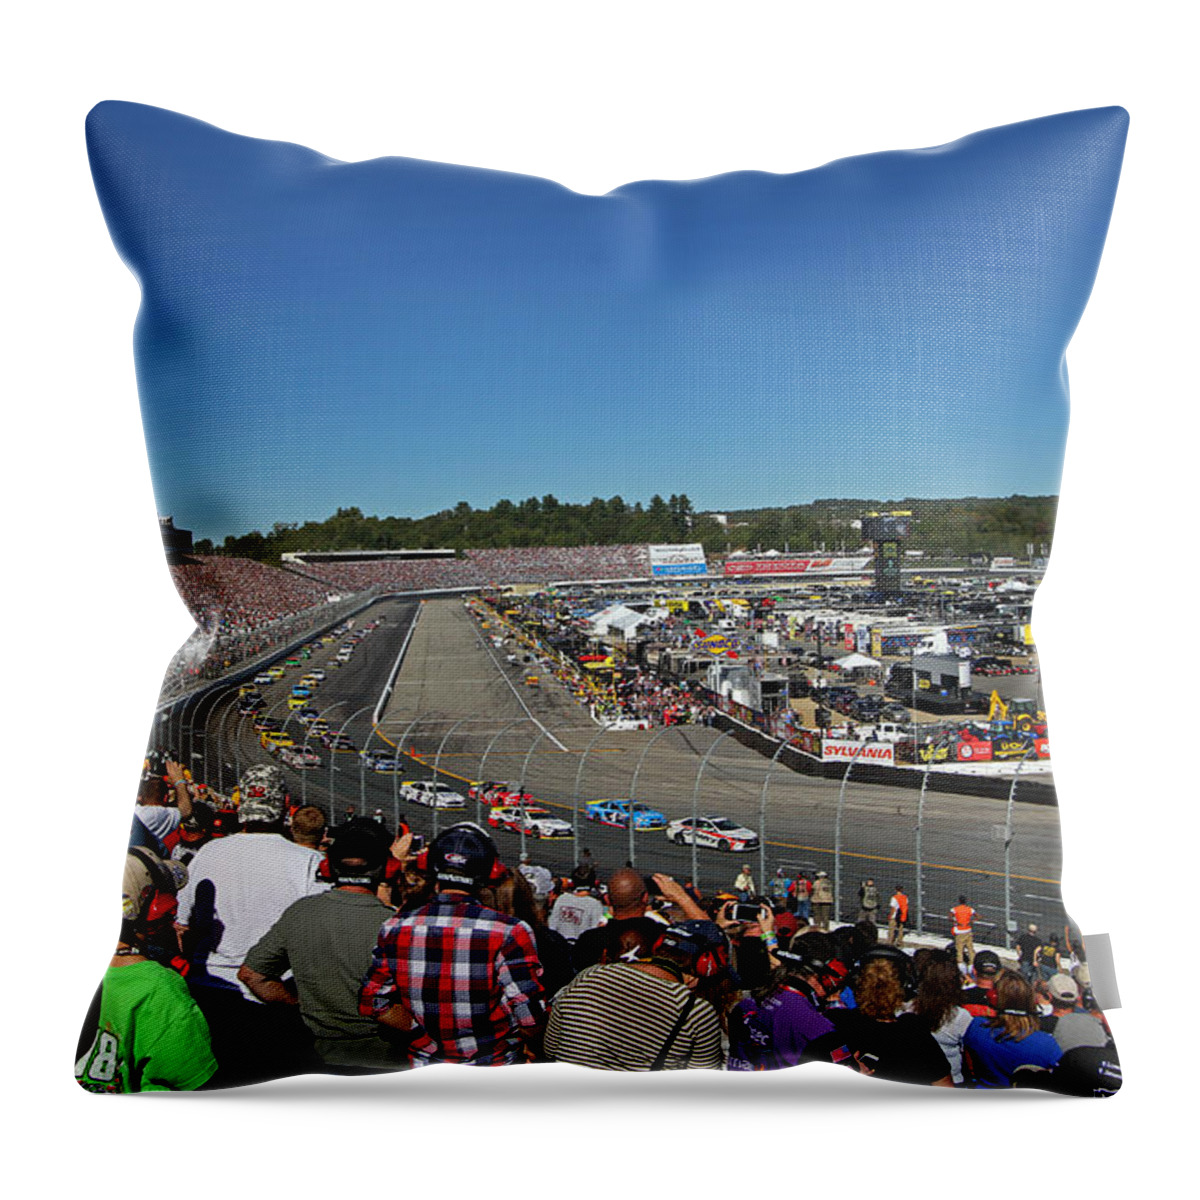 Safety Car Throw Pillow featuring the photograph New Hampshire Motor Speedway Safety Car by Juergen Roth